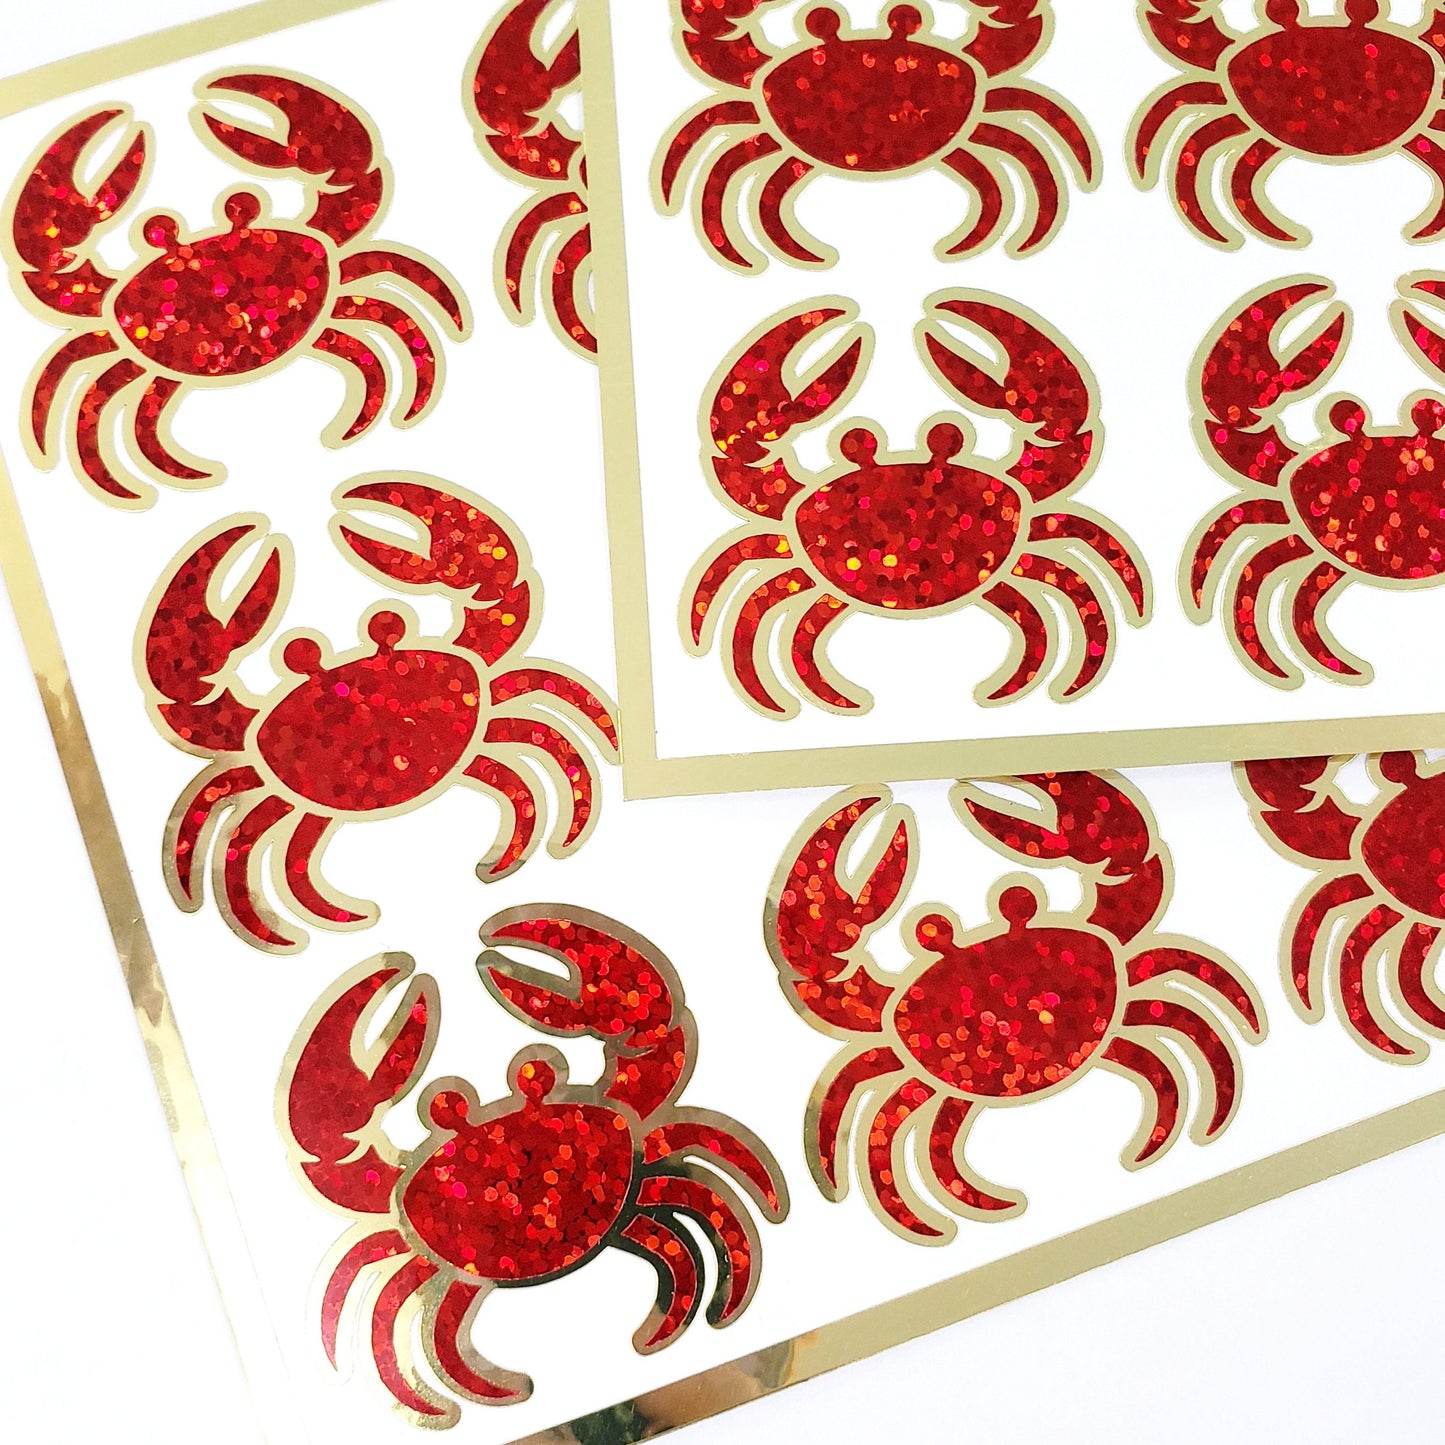 Crab Stickers, set of 12 sparkly red and gold vinyl decals for beach party, envelope seals, journals, laptop stickers, coastal decor.